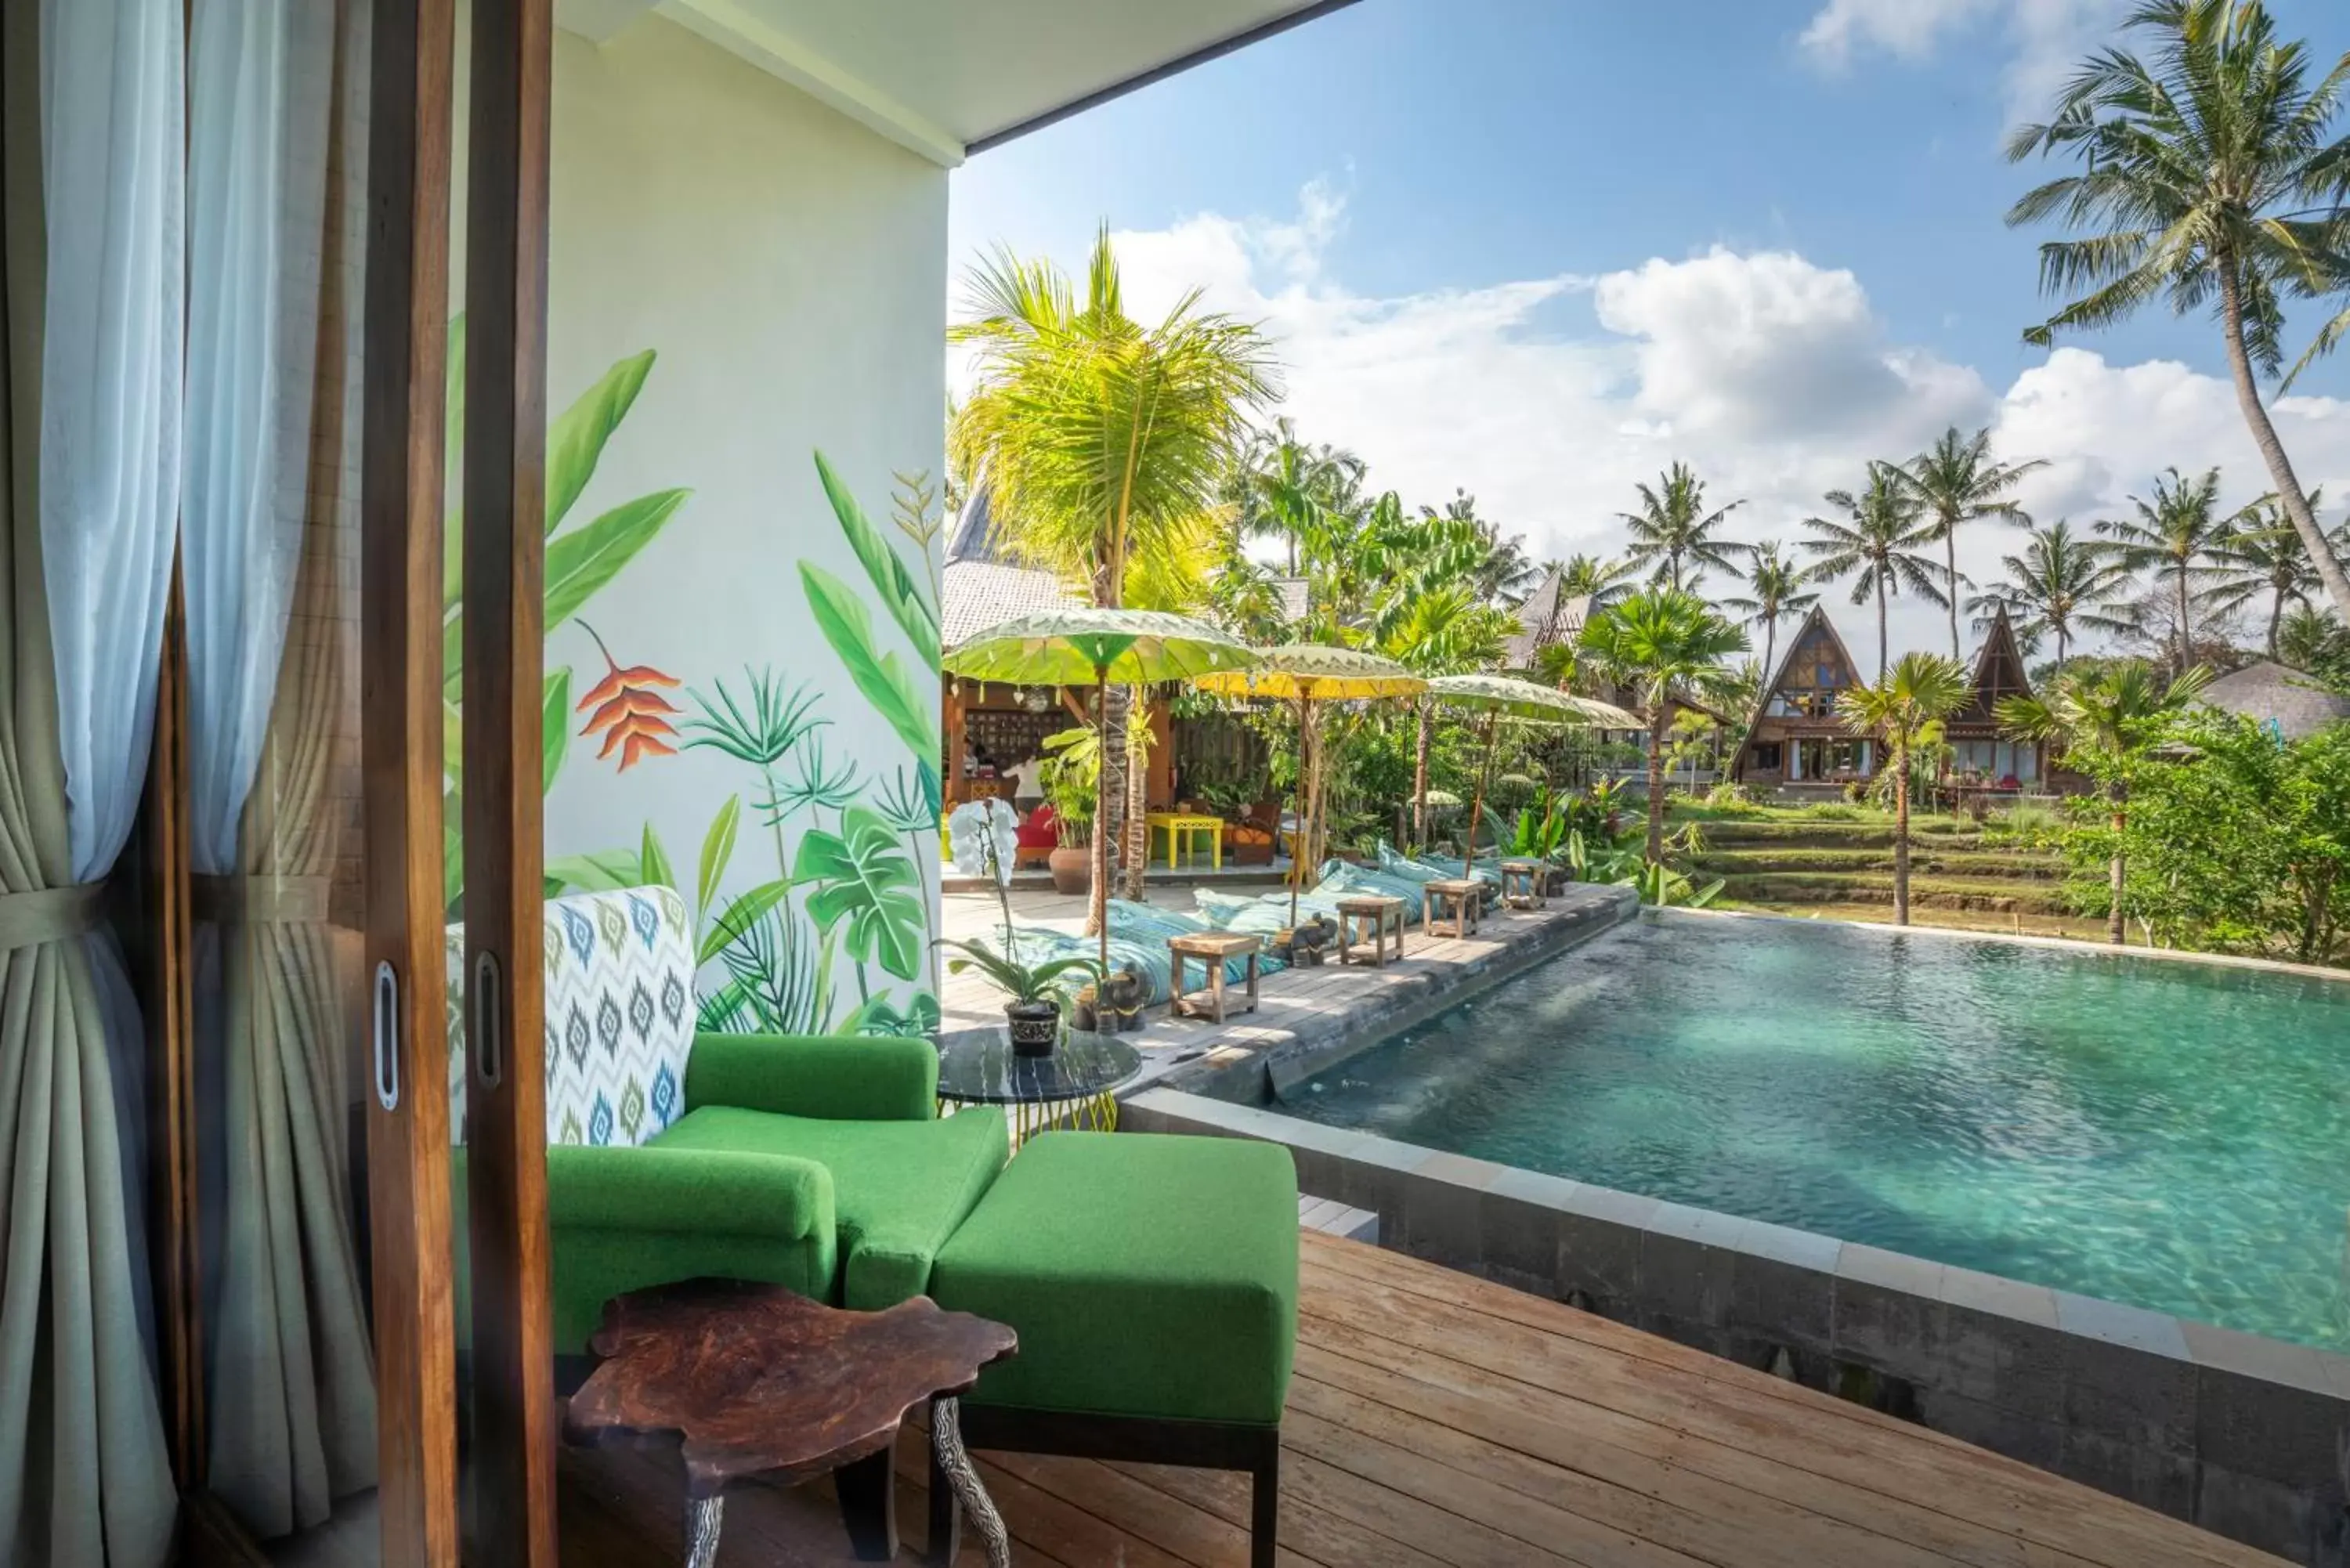 Property building, Swimming Pool in Menzel Ubud